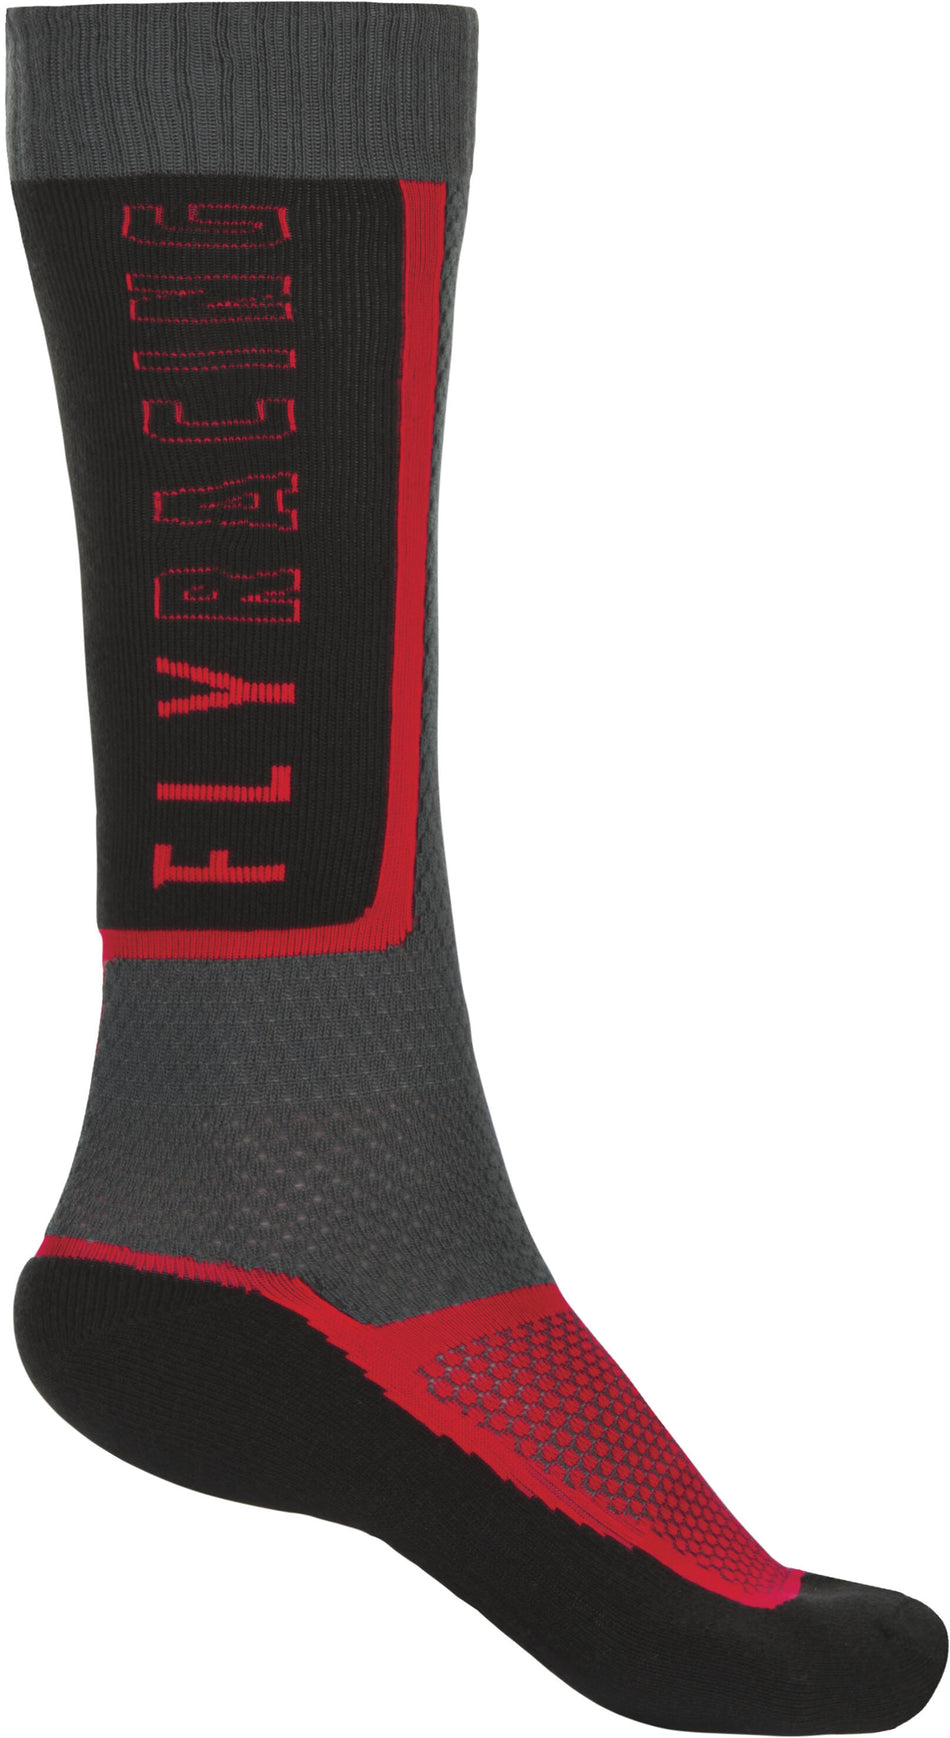 FLY RACING Mx Sock Thin Black/Grey/Red Sm/Md 350-0512S